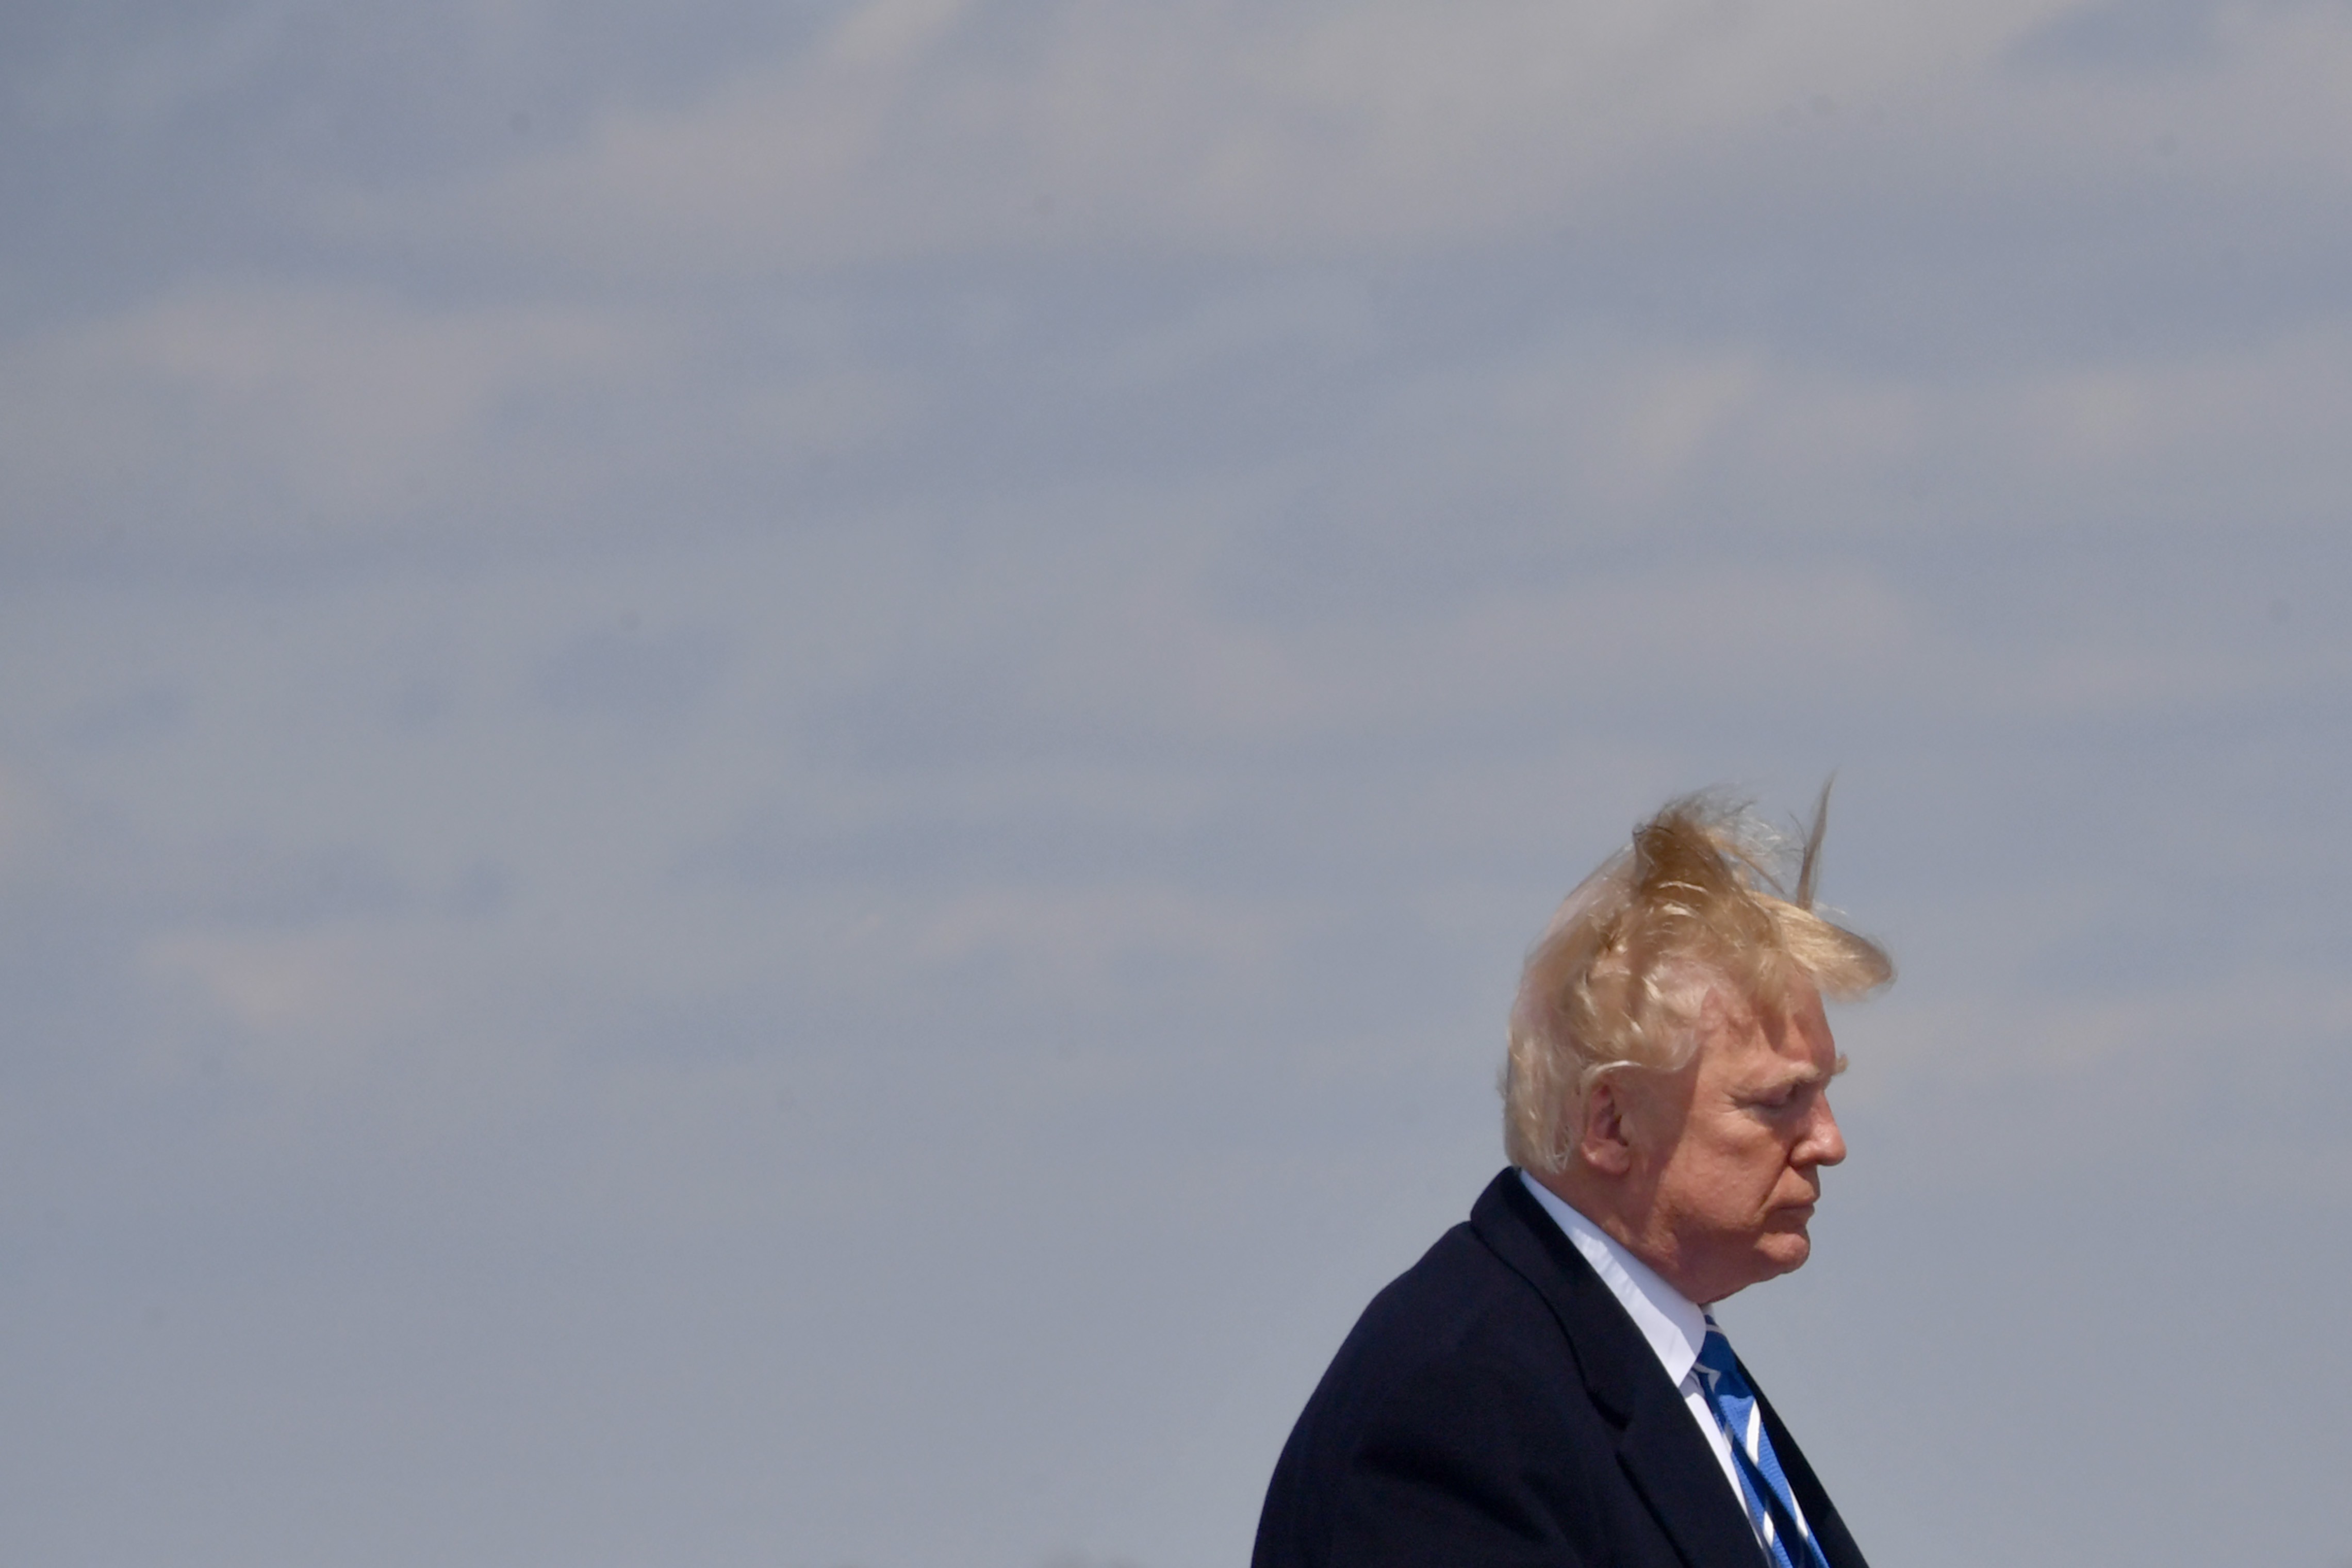 US President Donald Trump boards Air Force One on a windy day at Andrews Air Force base on April 5, 2018 near Washington, DC. Trump is heading to White Sulphur Springs, West Virginia for a round table discussion on tax reform. (NICHOLAS KAMM/AFP/Getty Images)